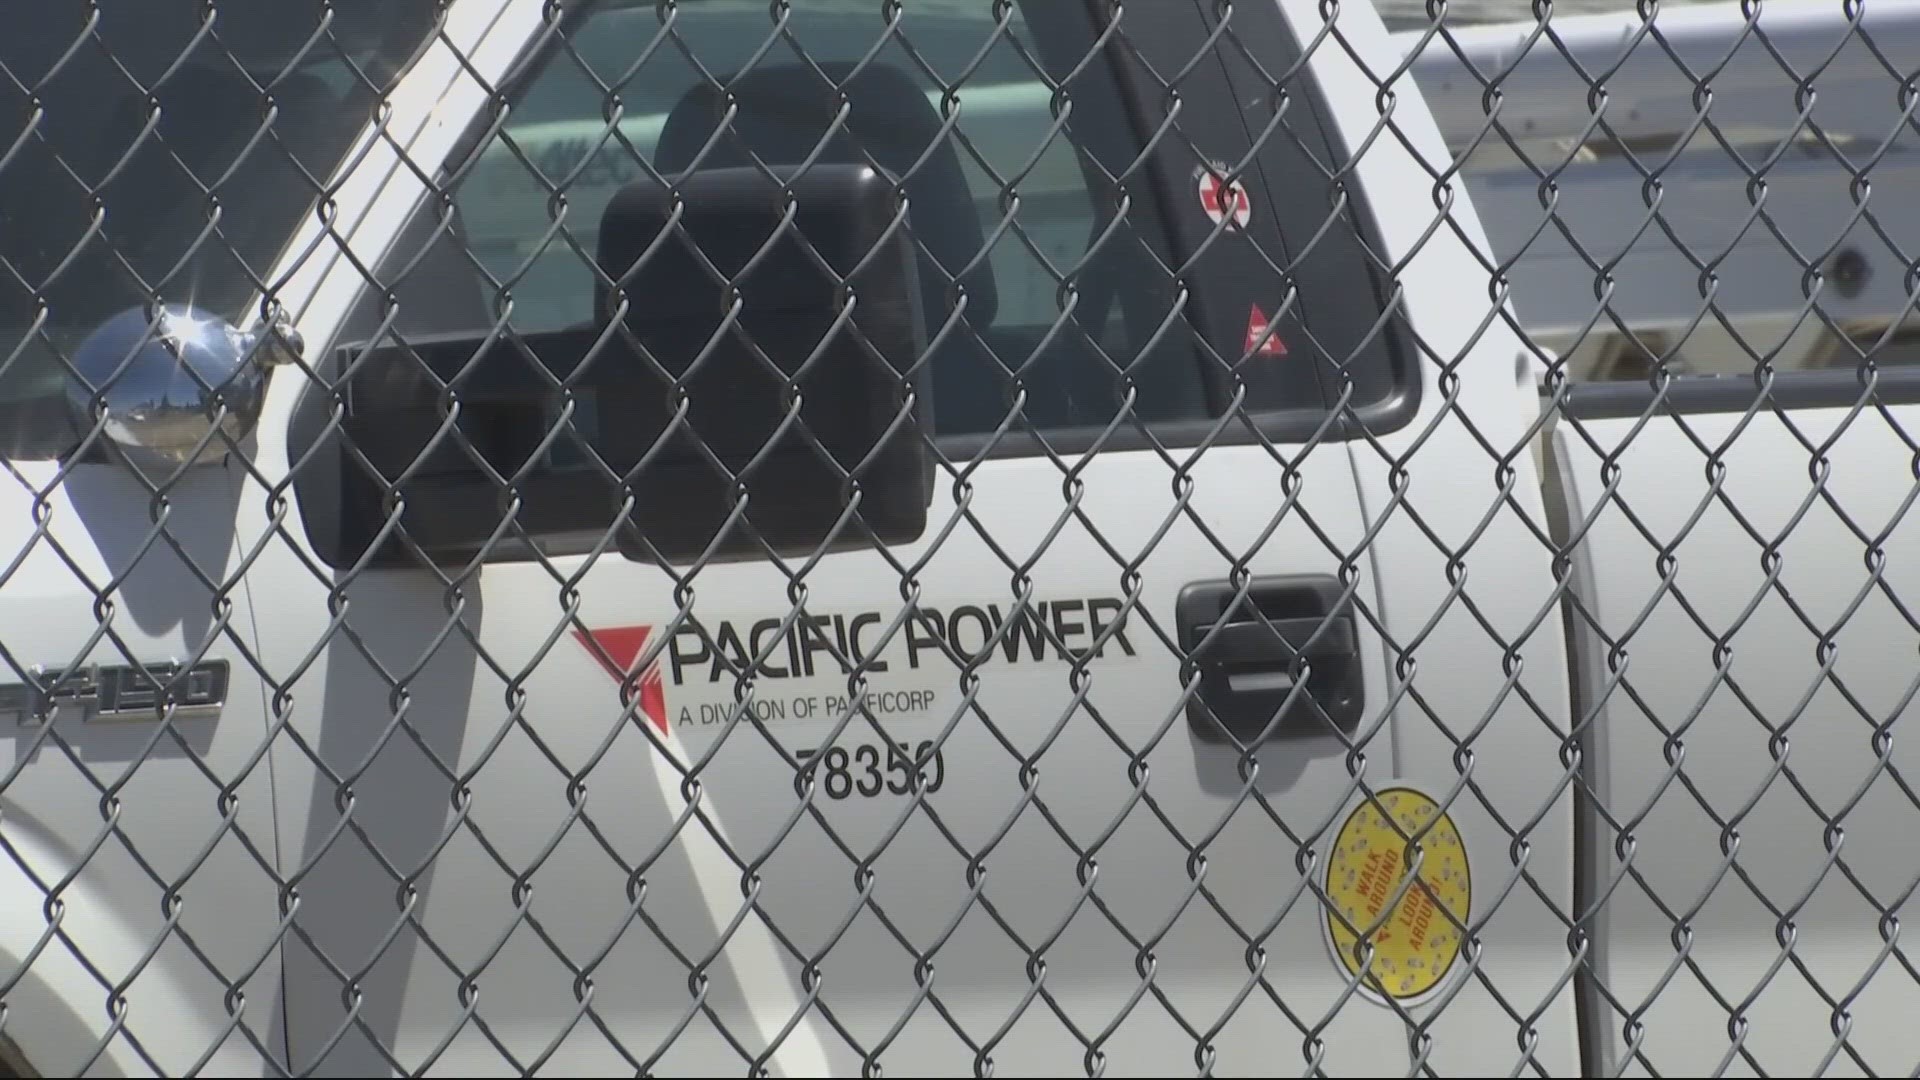 One of Oregon’s main electricity providers, Pacific Power is requesting a 16.9% increase to rates, which could add nearly $30 each month to some power bills.